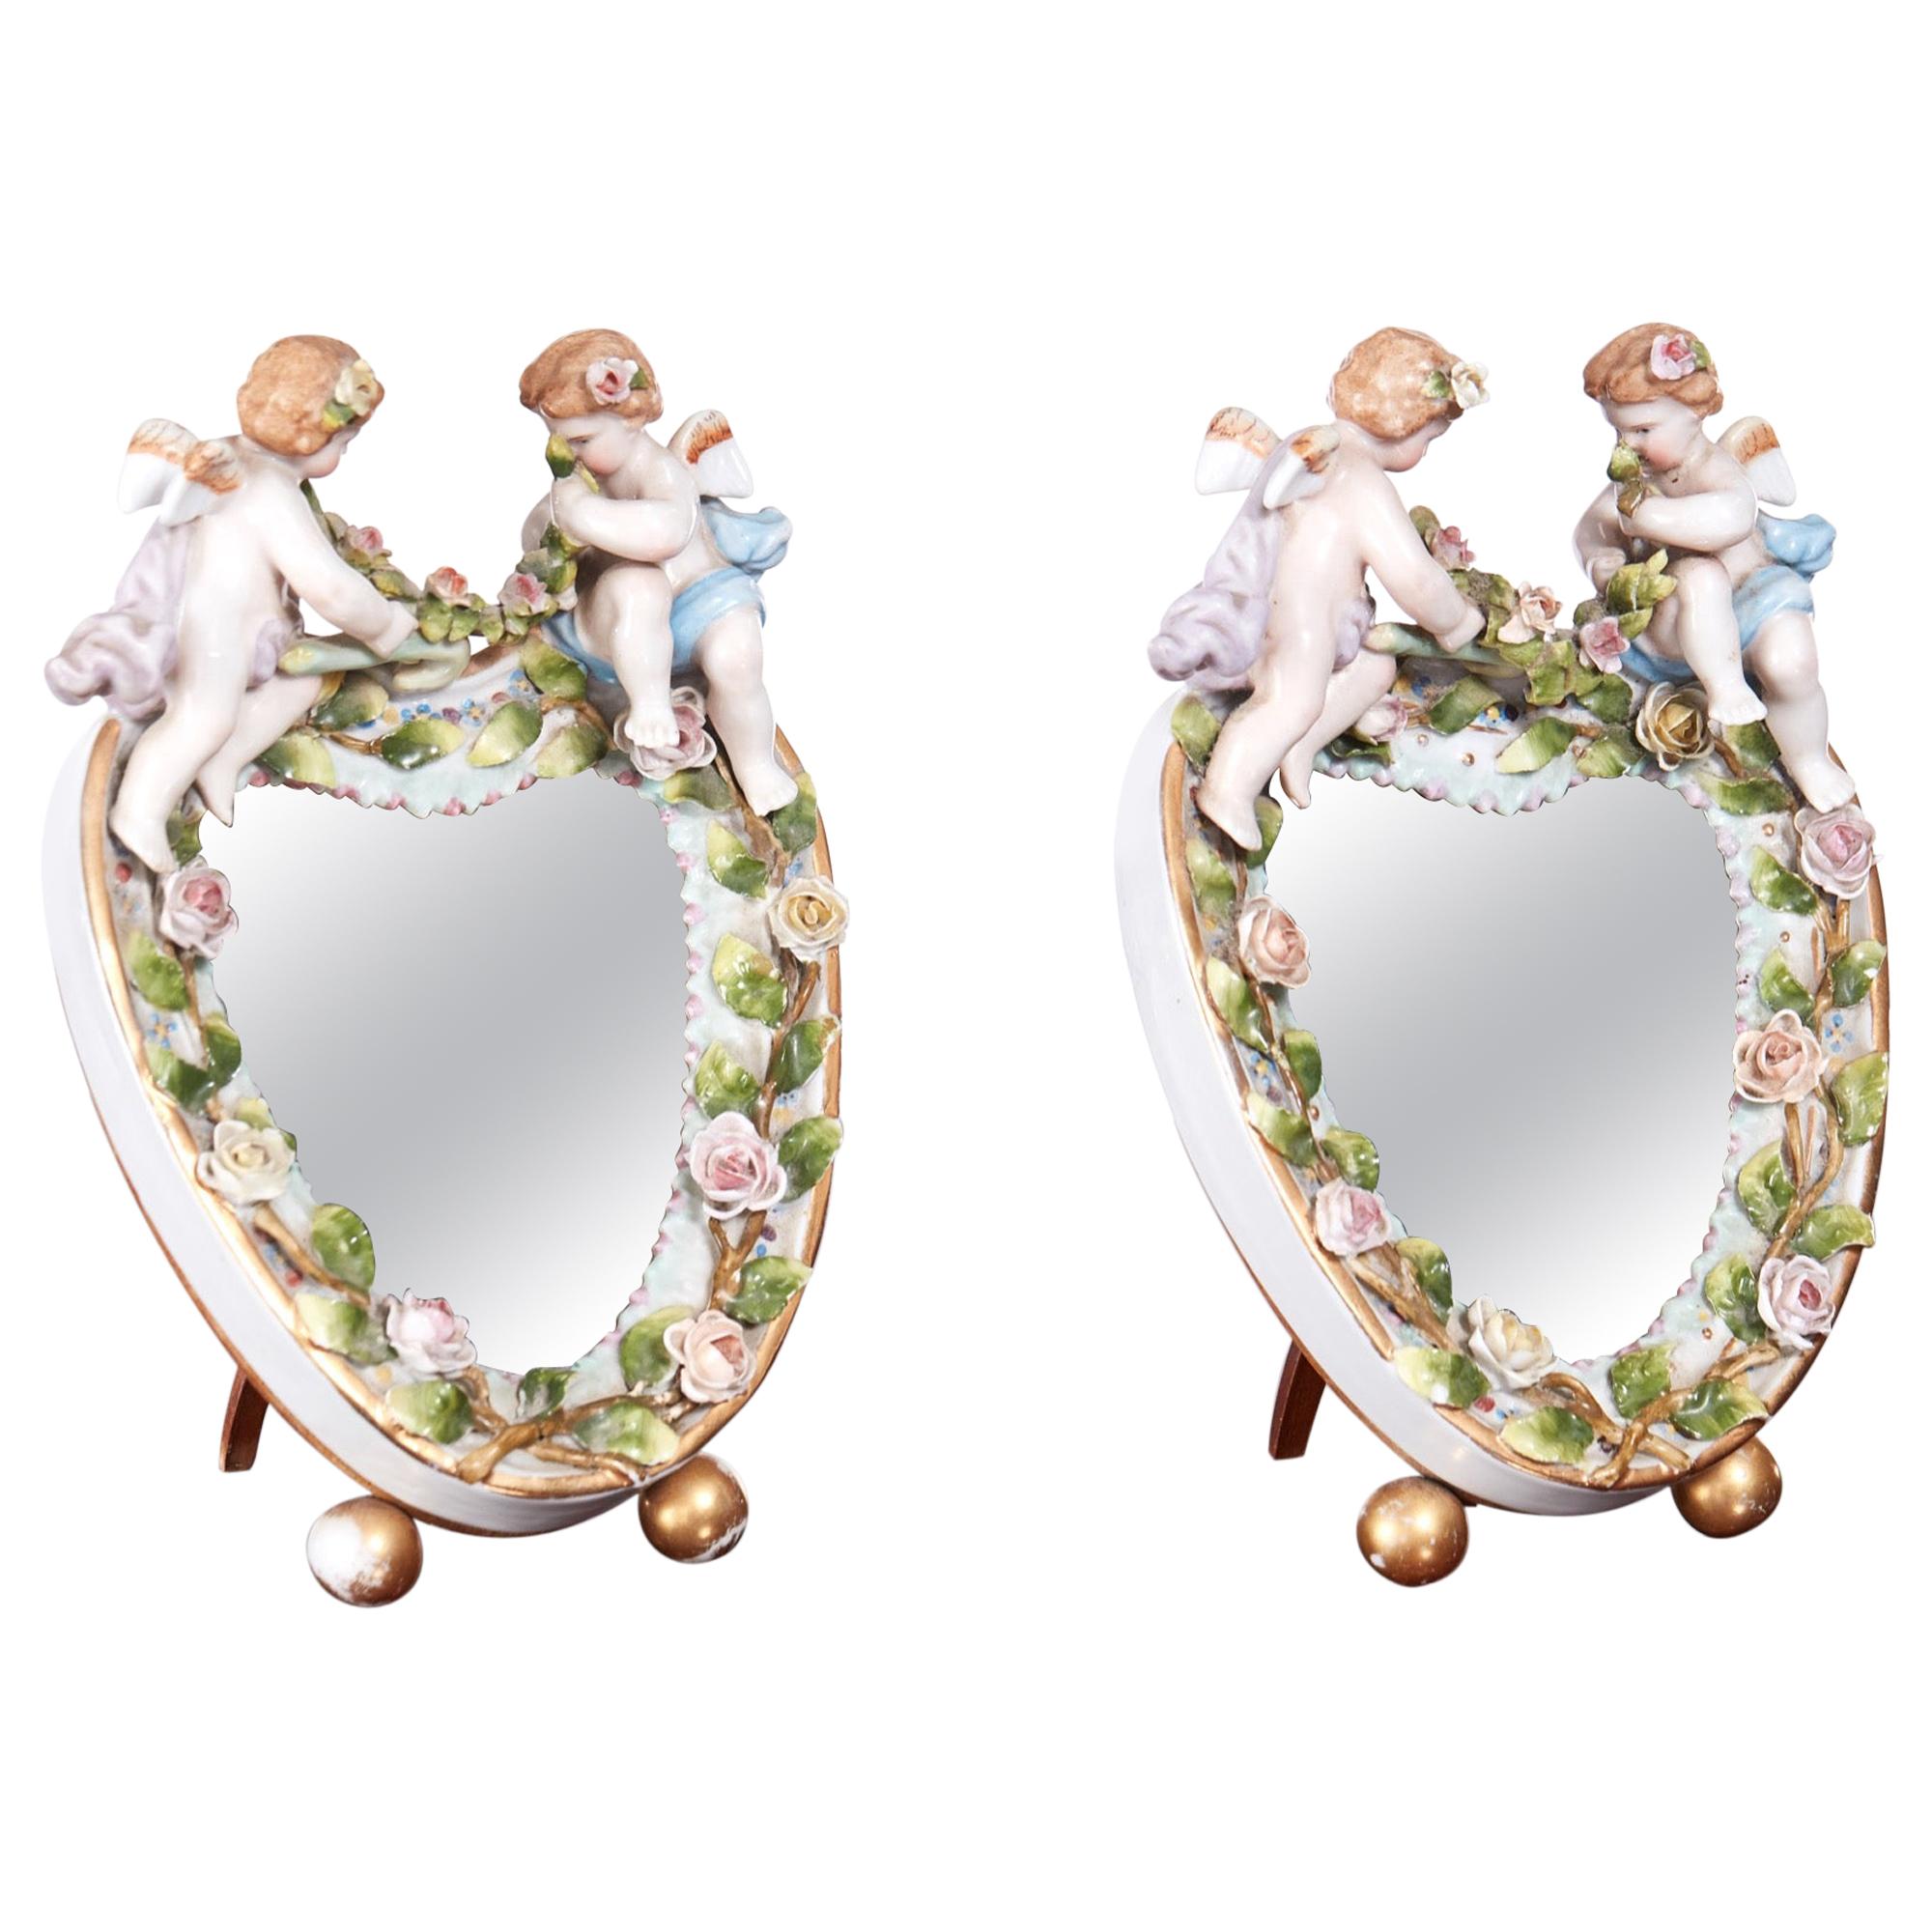 Pair of Antique Continental Porcelain Heart Shaped Mirrors